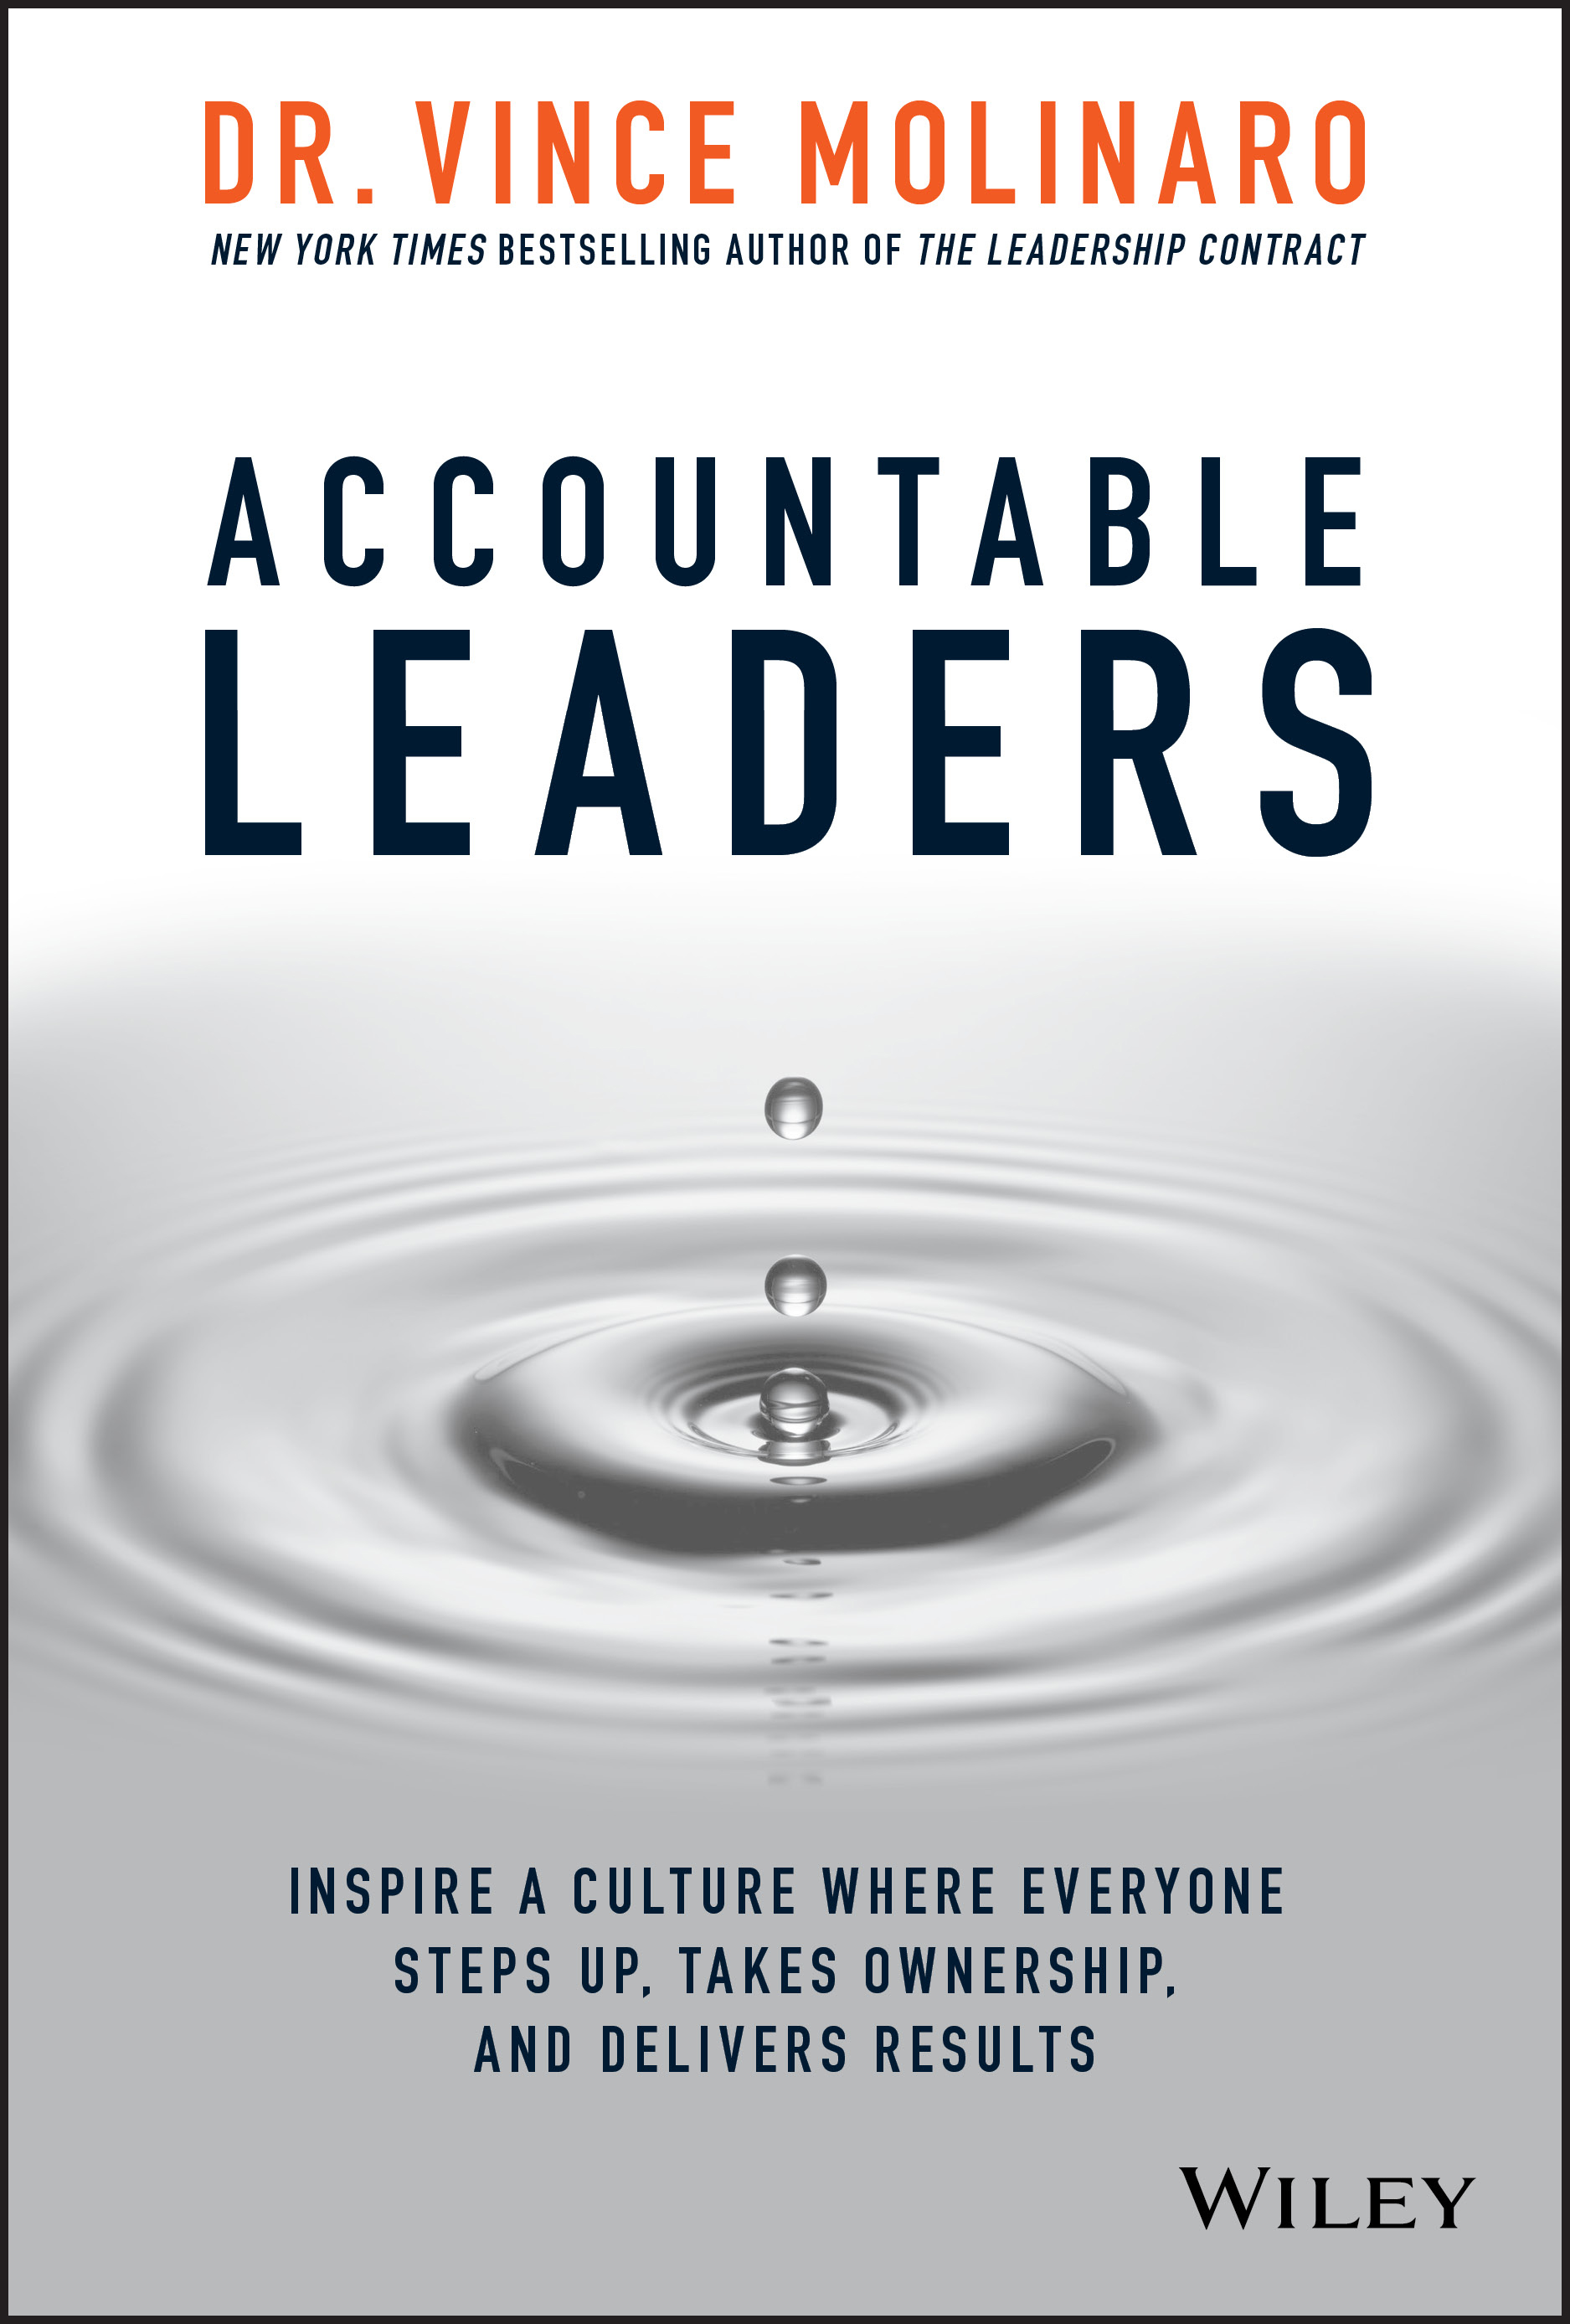  Accountable Leaders: Inspire a Culture Where Everyone Steps Up, Takes Ownership, and Delivers Results